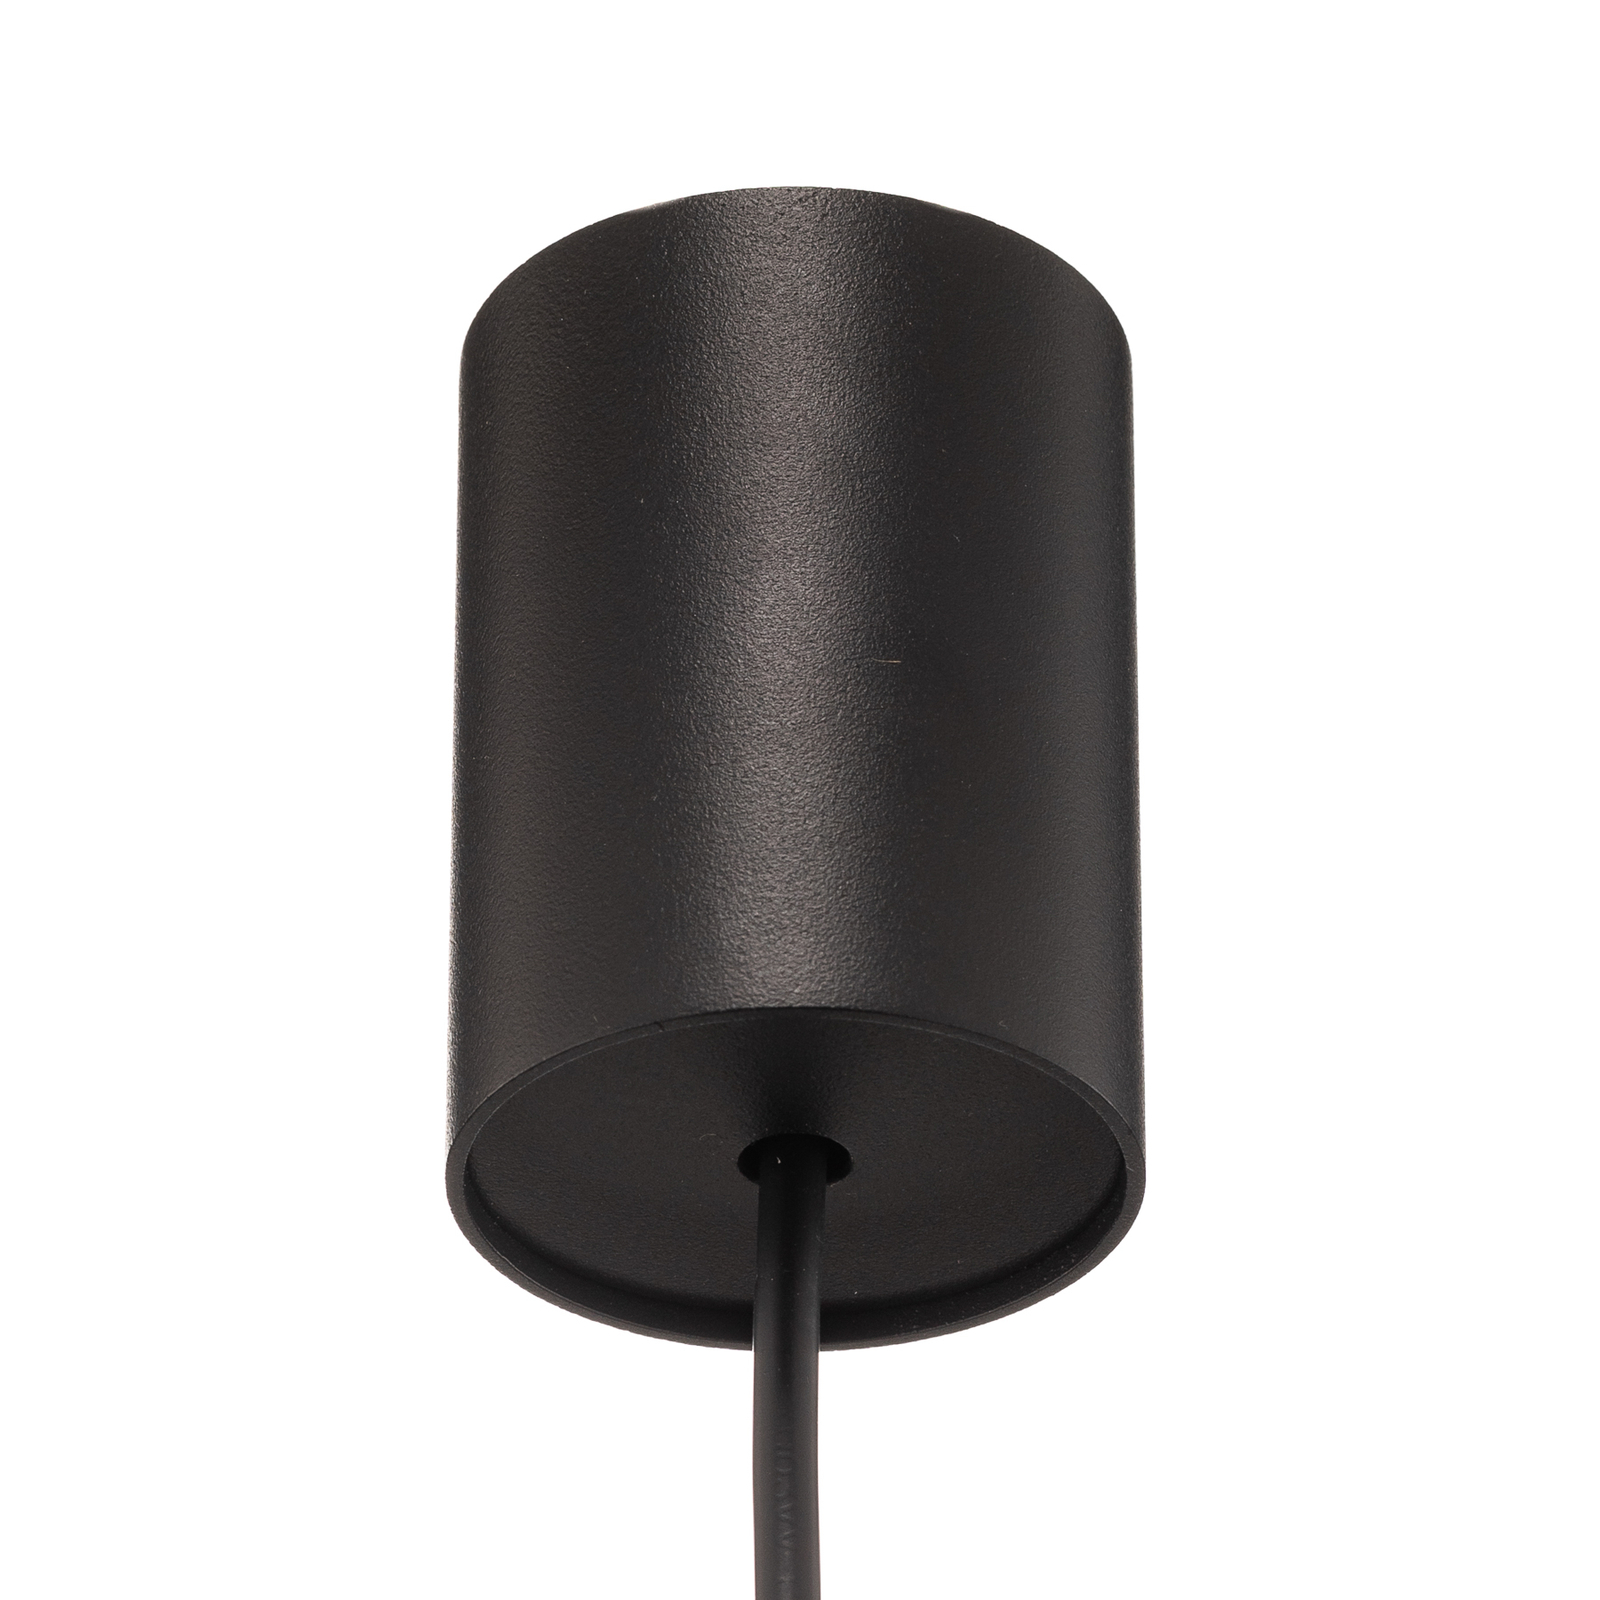 Zenith S pendant light with metal shade in black